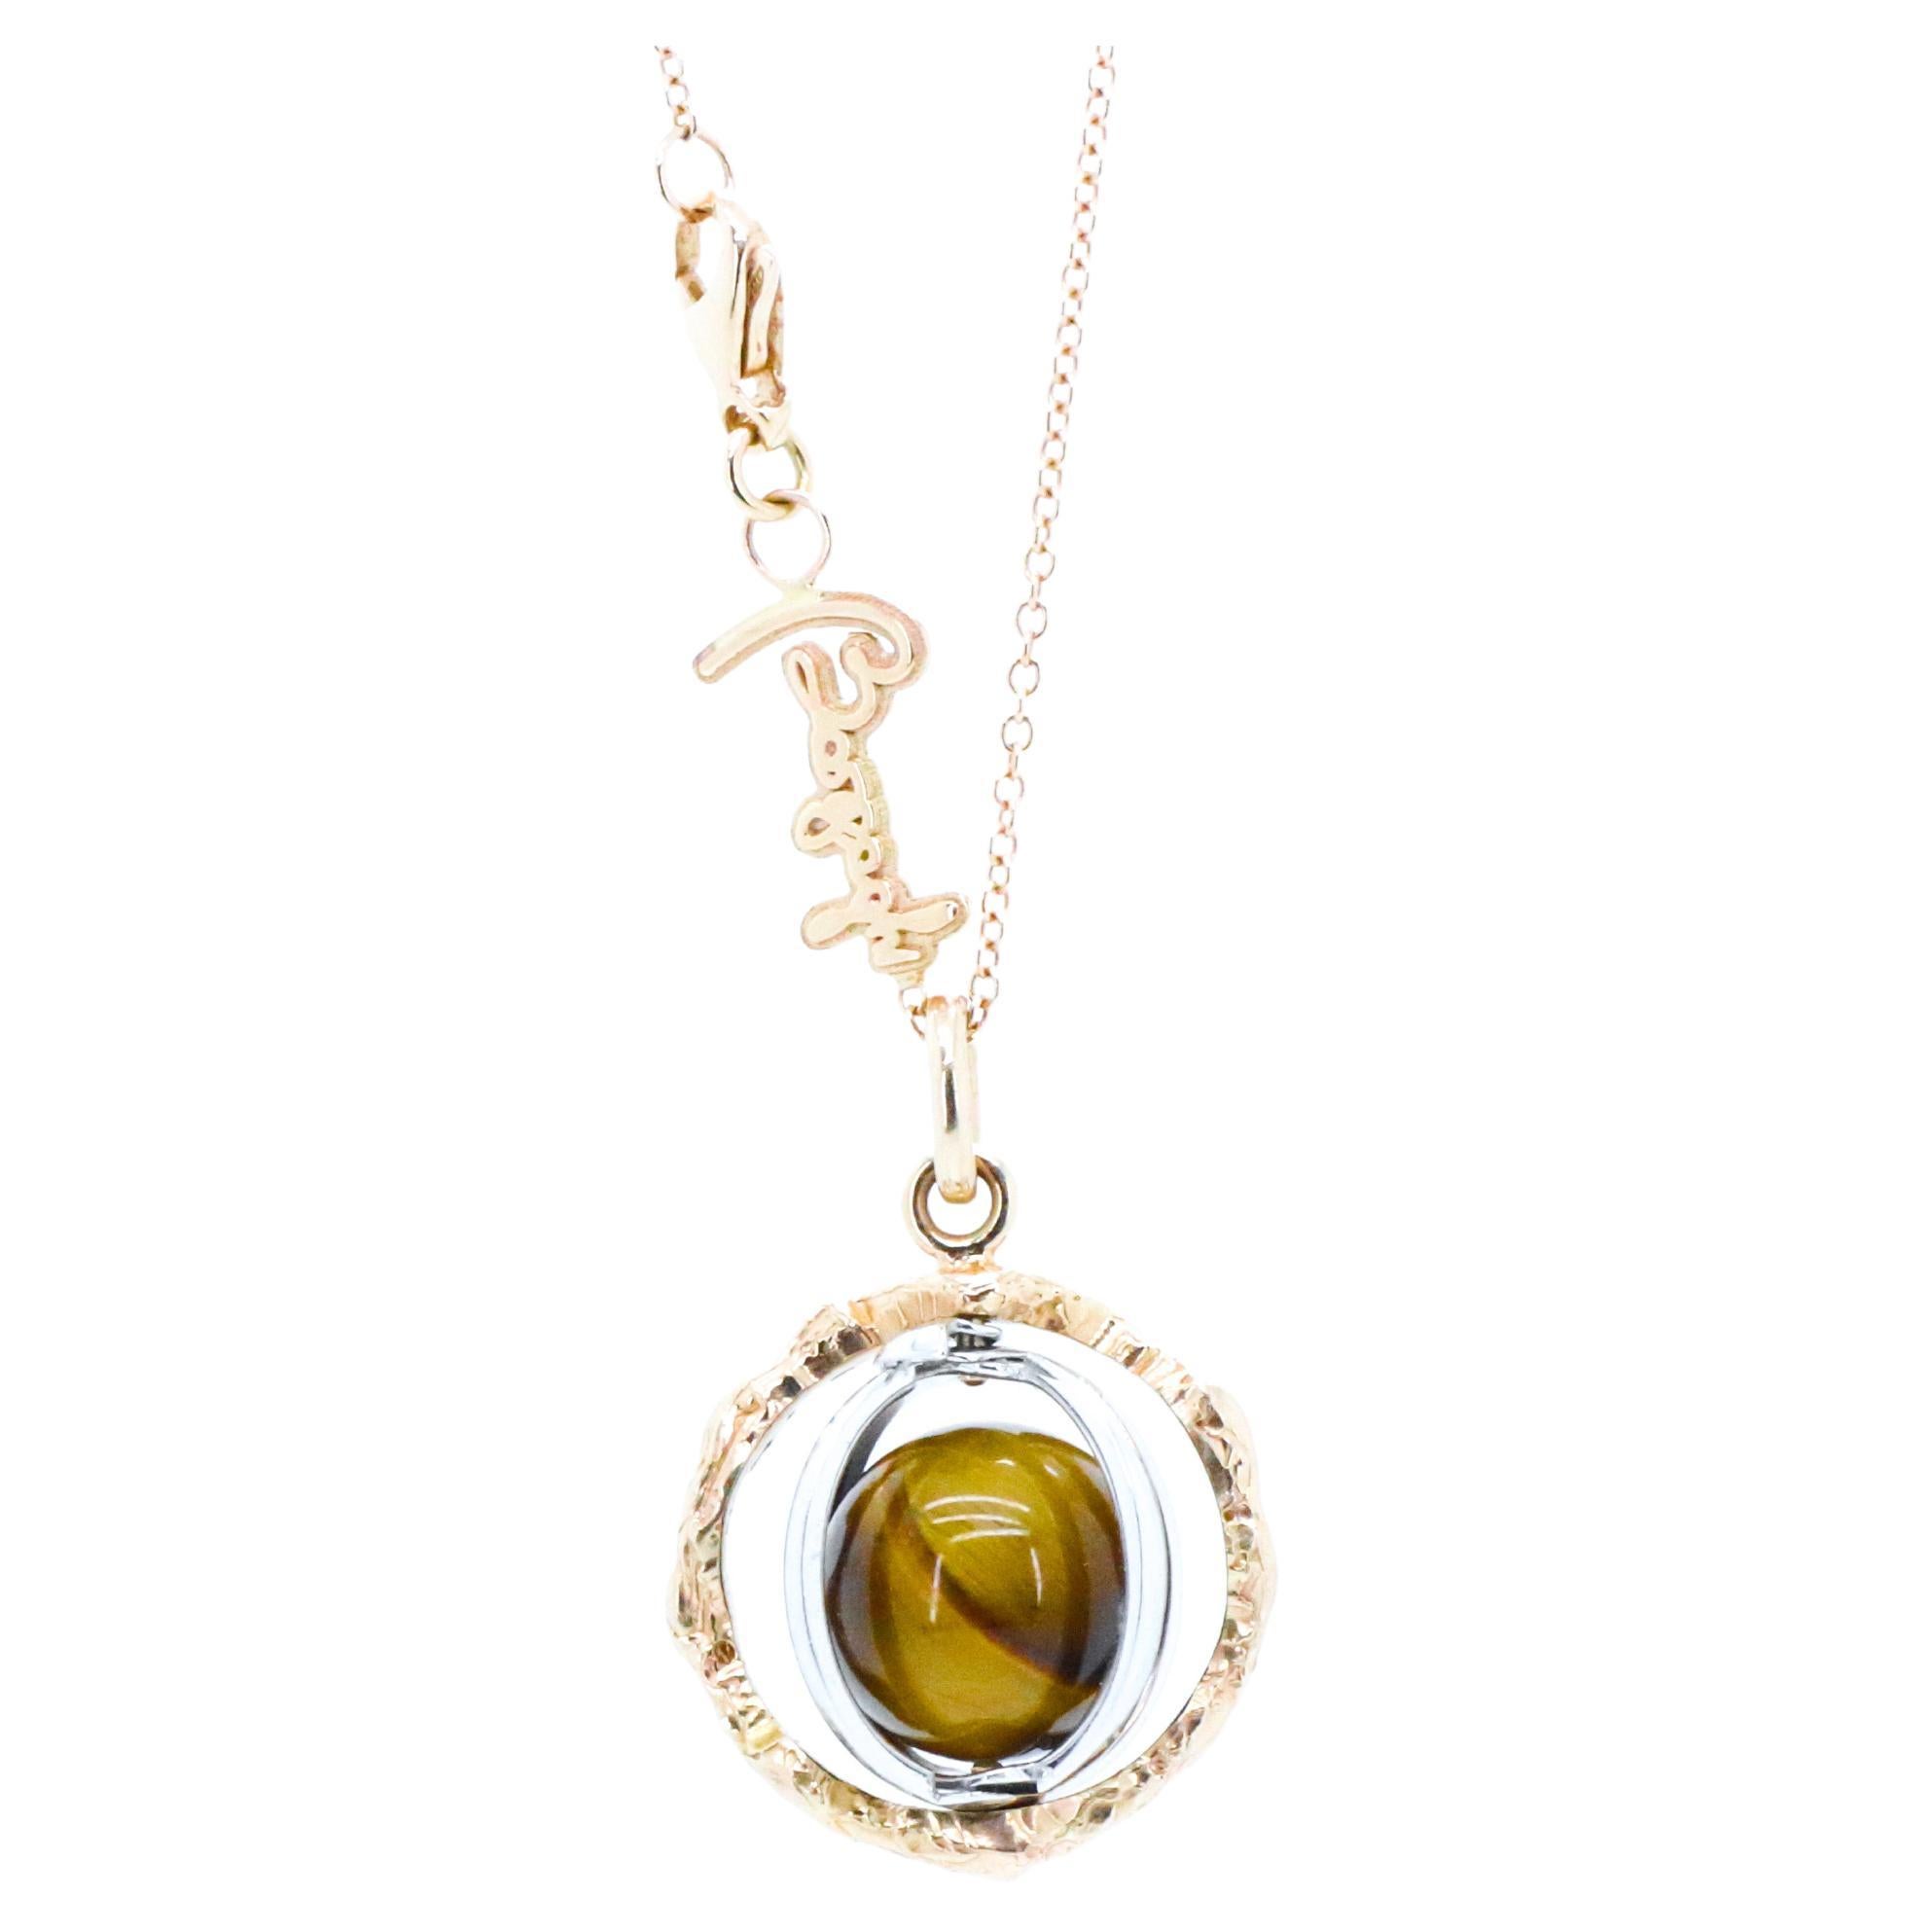 18k Gold Made in Italy Tiger Eye Changeable Gem Revolving Loops Essence Necklace.
Experience the Wellbeing of Sound and Gemstones with the Sonoro Pendant Necklace.
Unlock Your Divine Potential with the Sonoro pendant. 
Gems and metal are